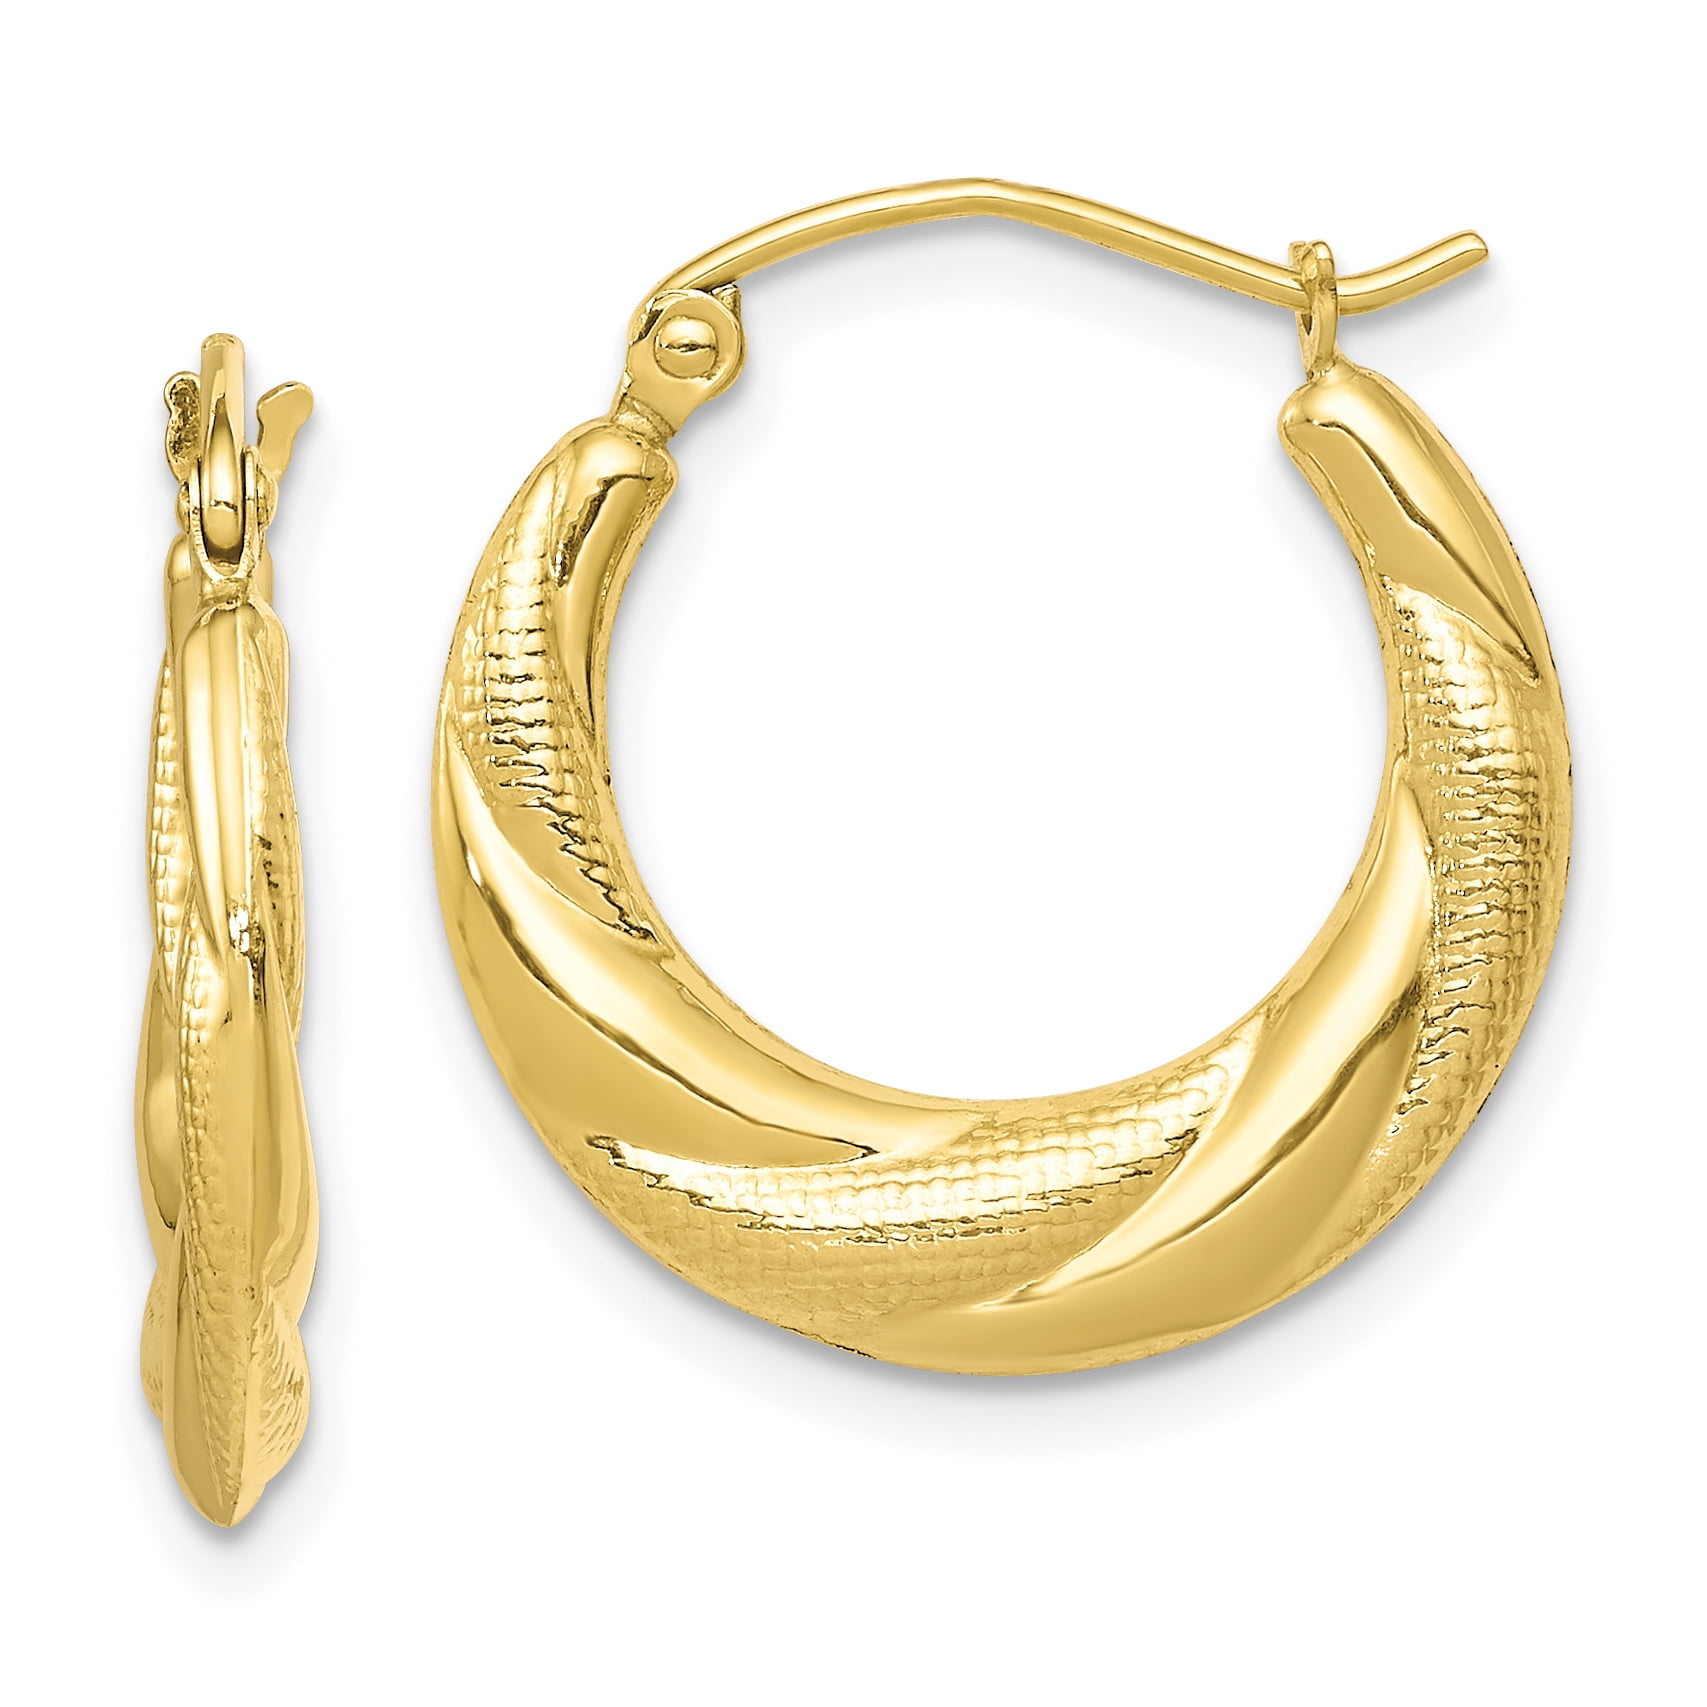 10k Yellow Gold Scalloped Textured Hollow Hoop Earrings 